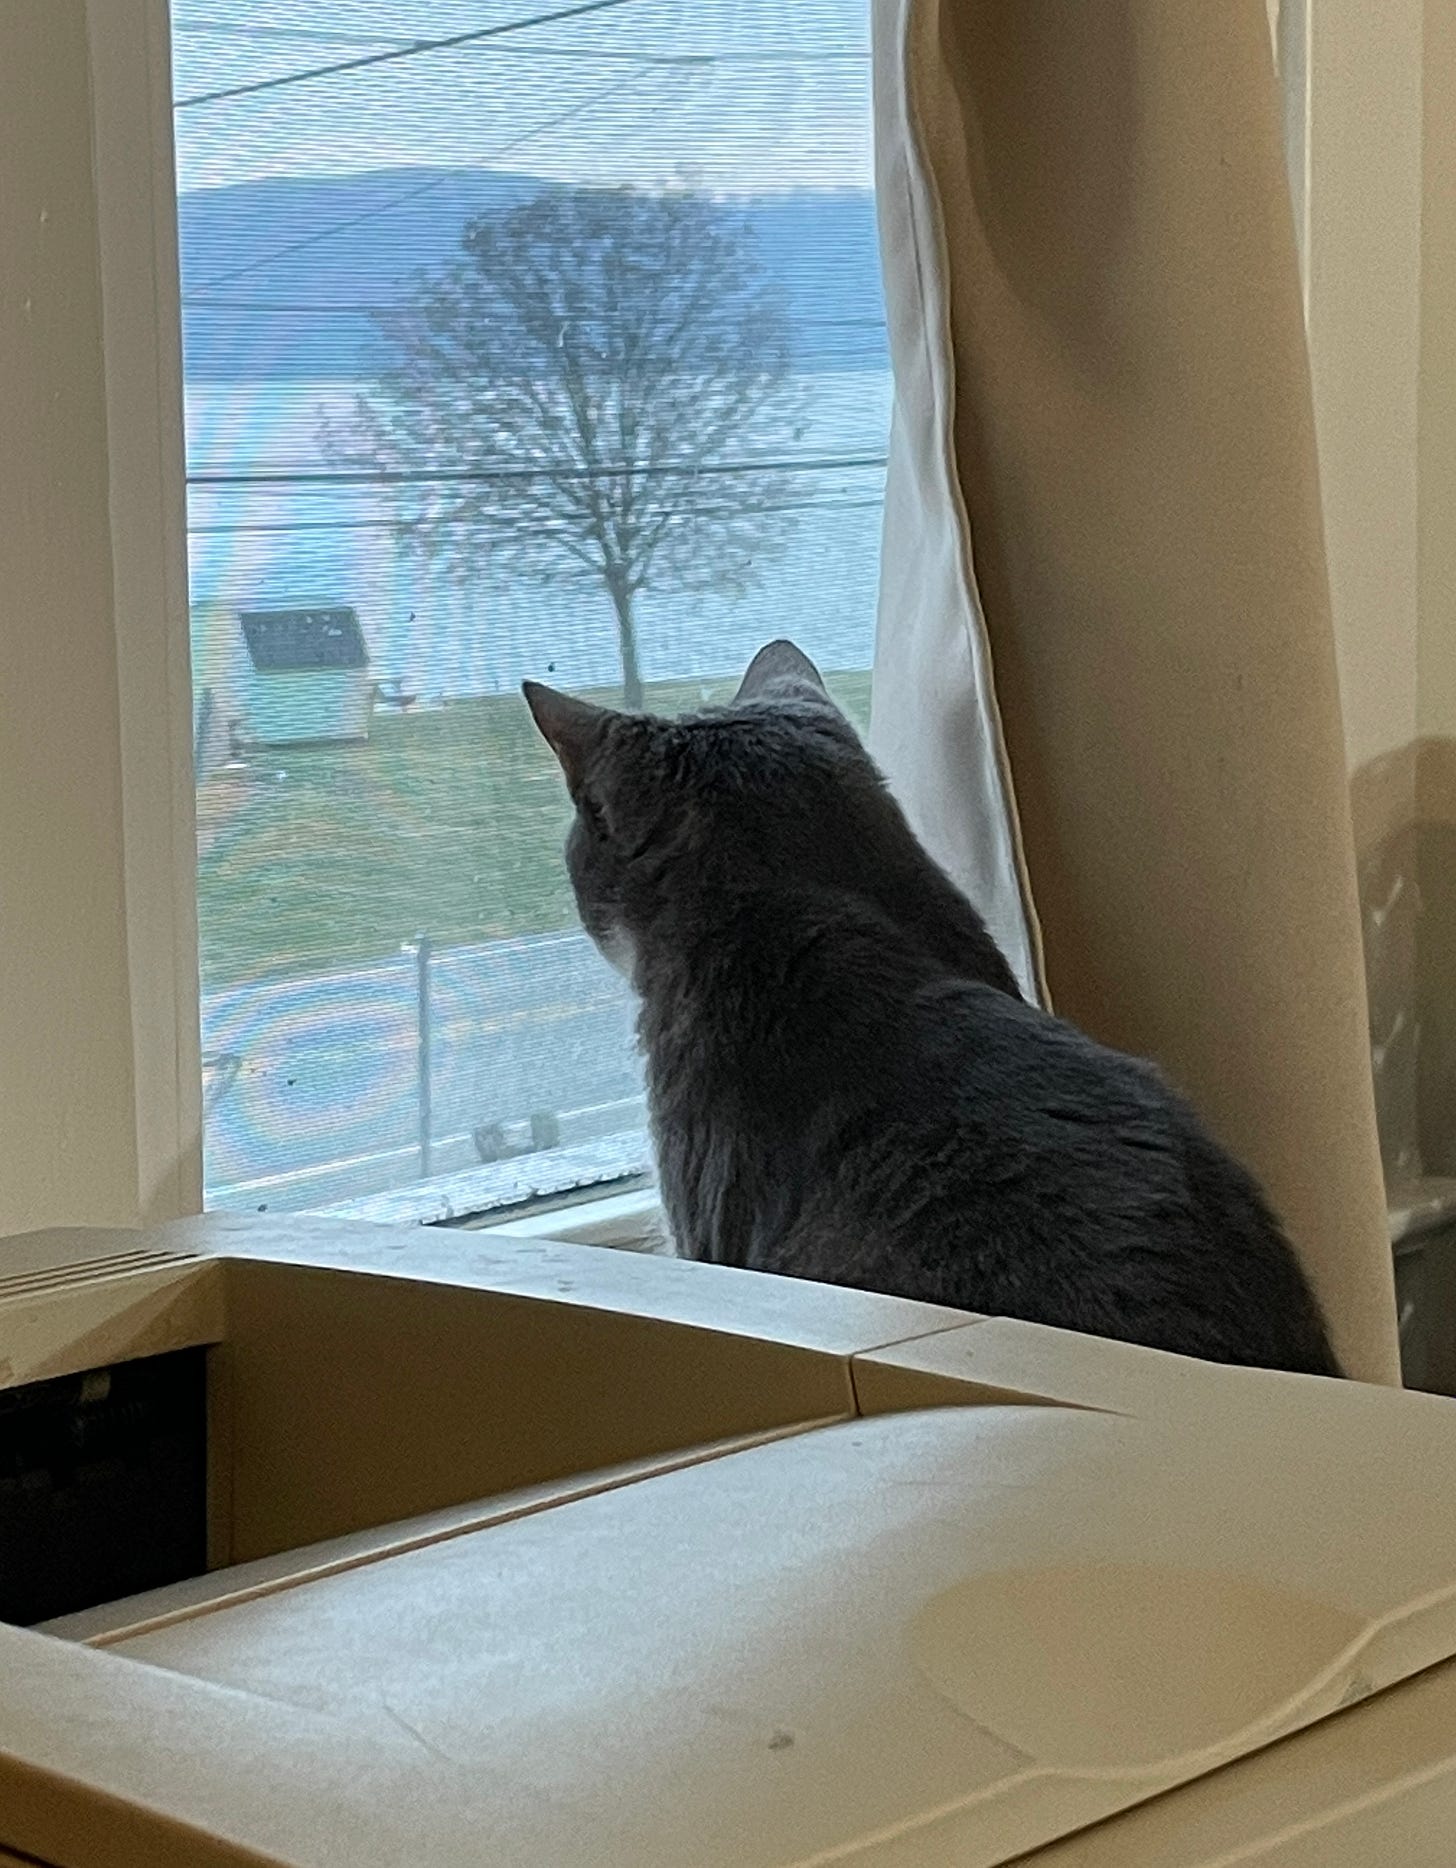 A cat looking out the window at the river.